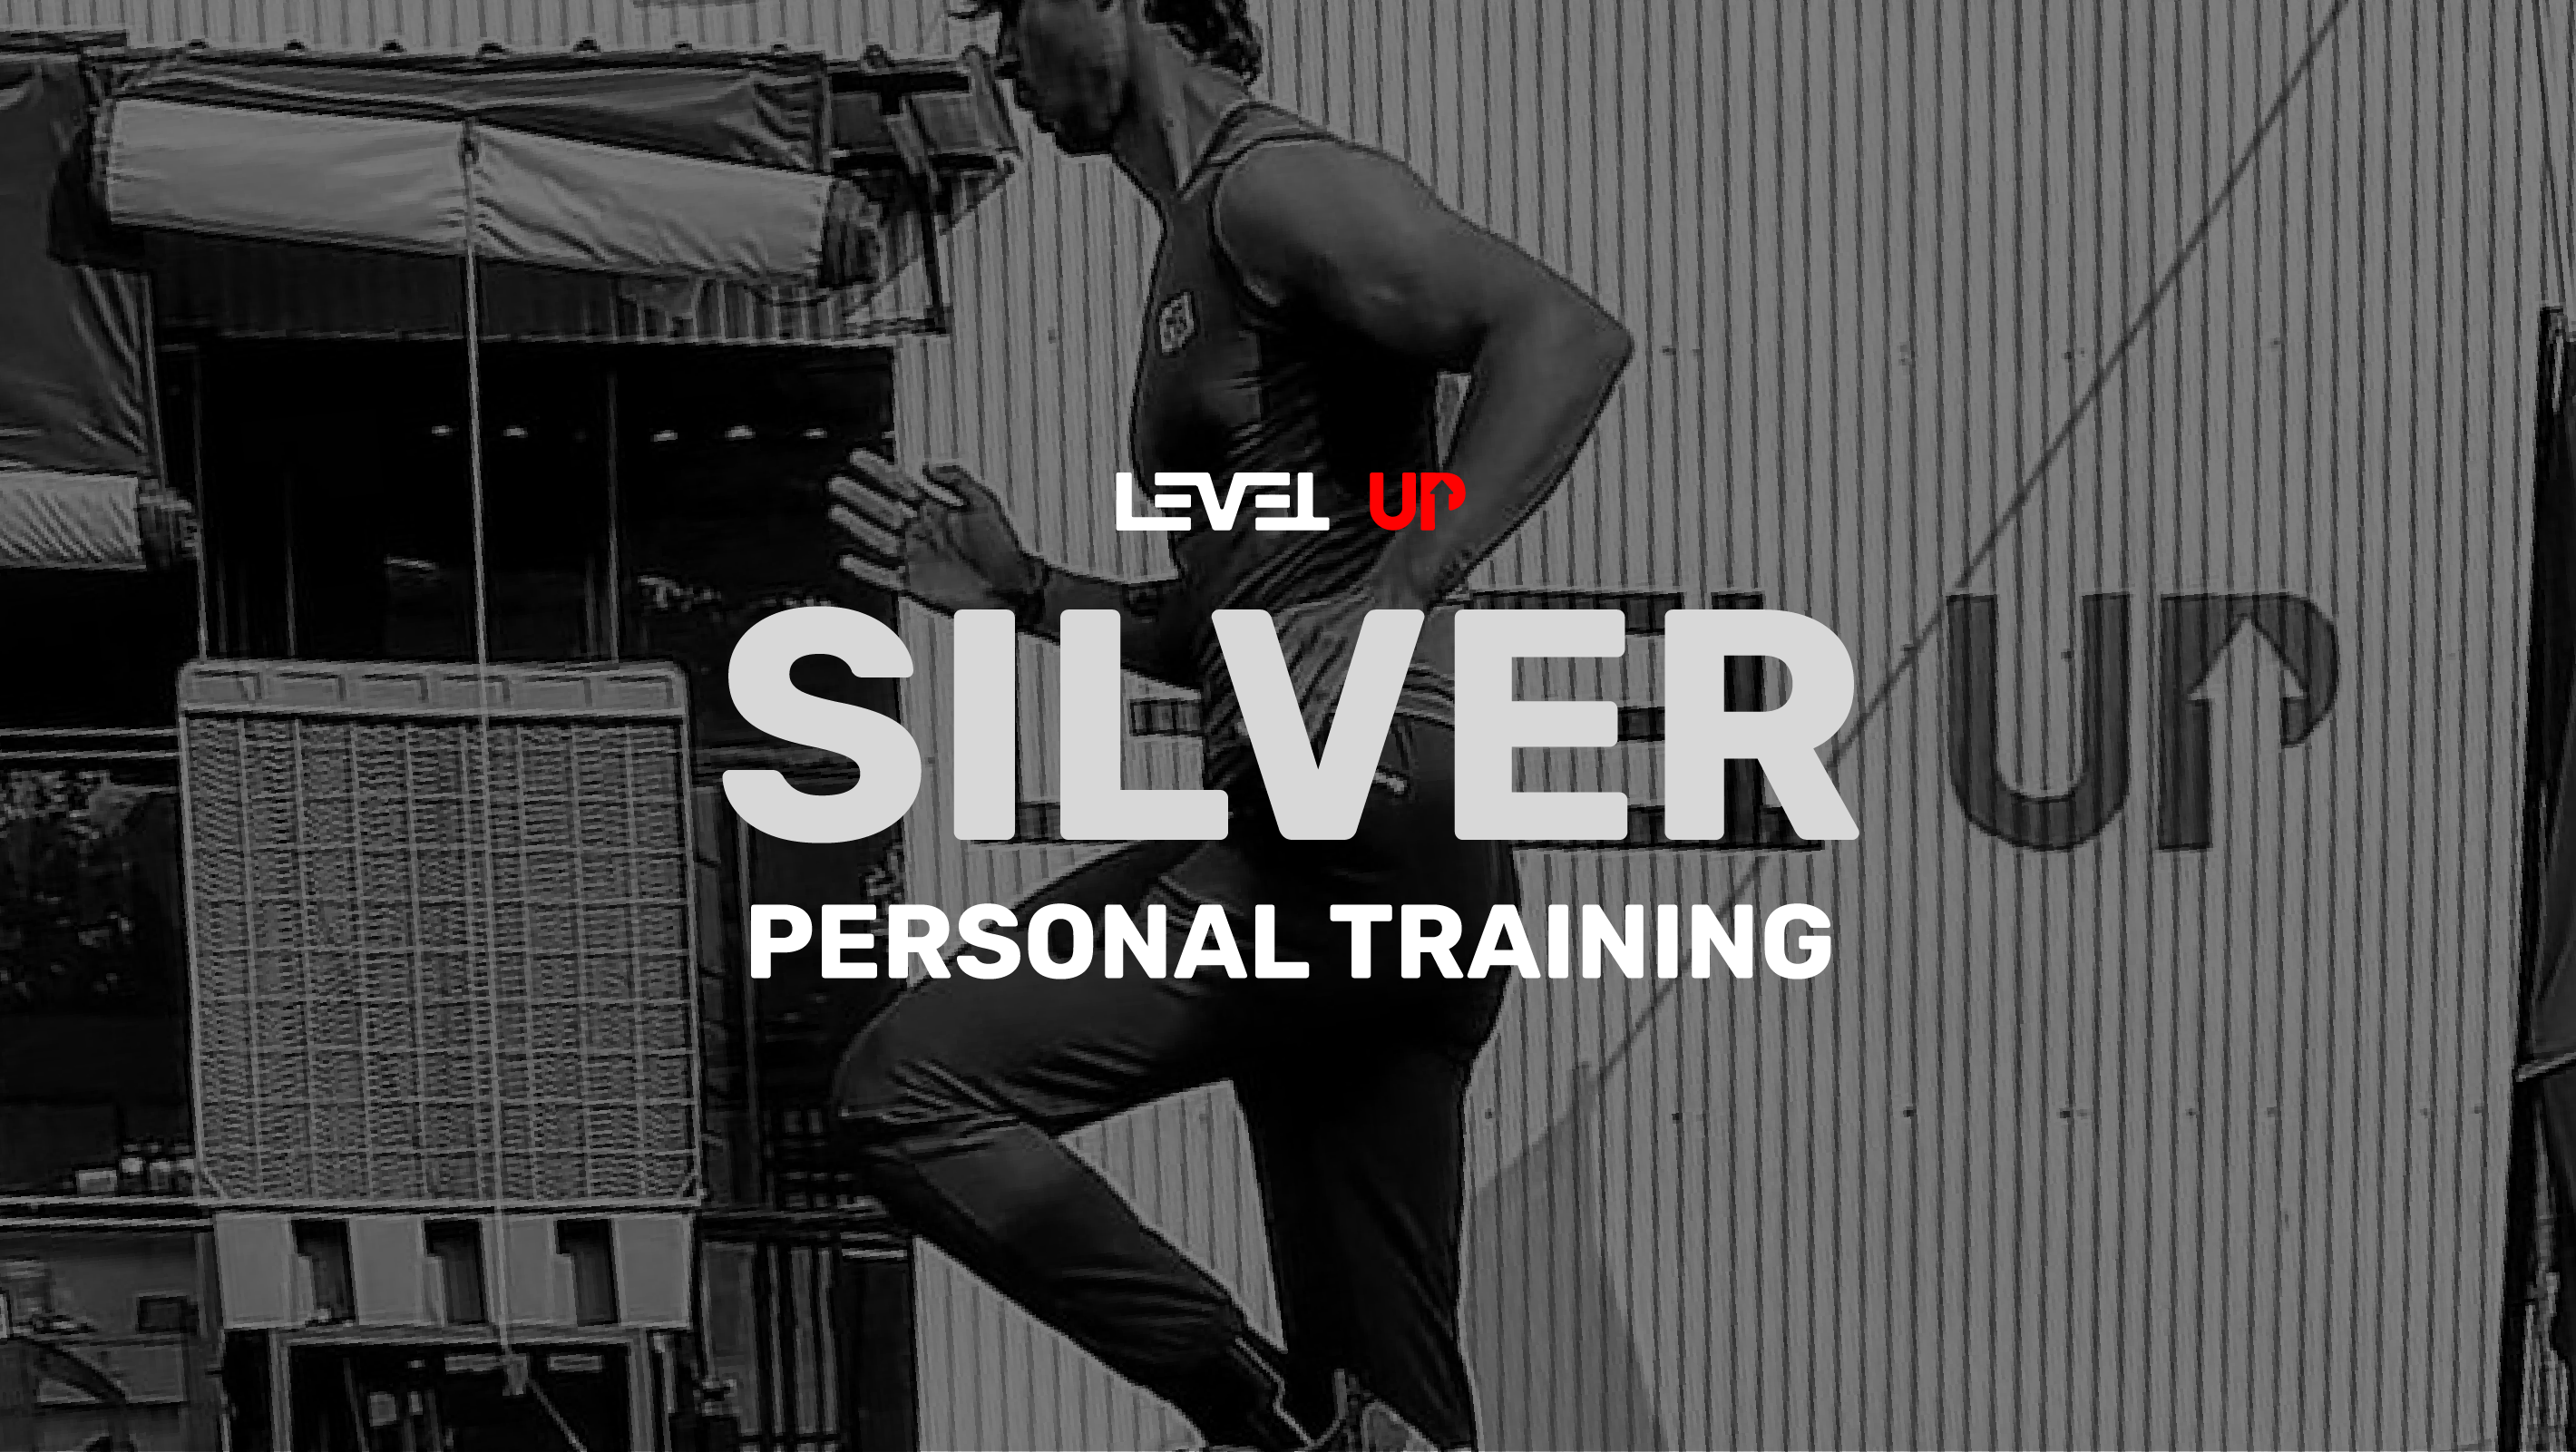 Level Up SILVER Personal Training